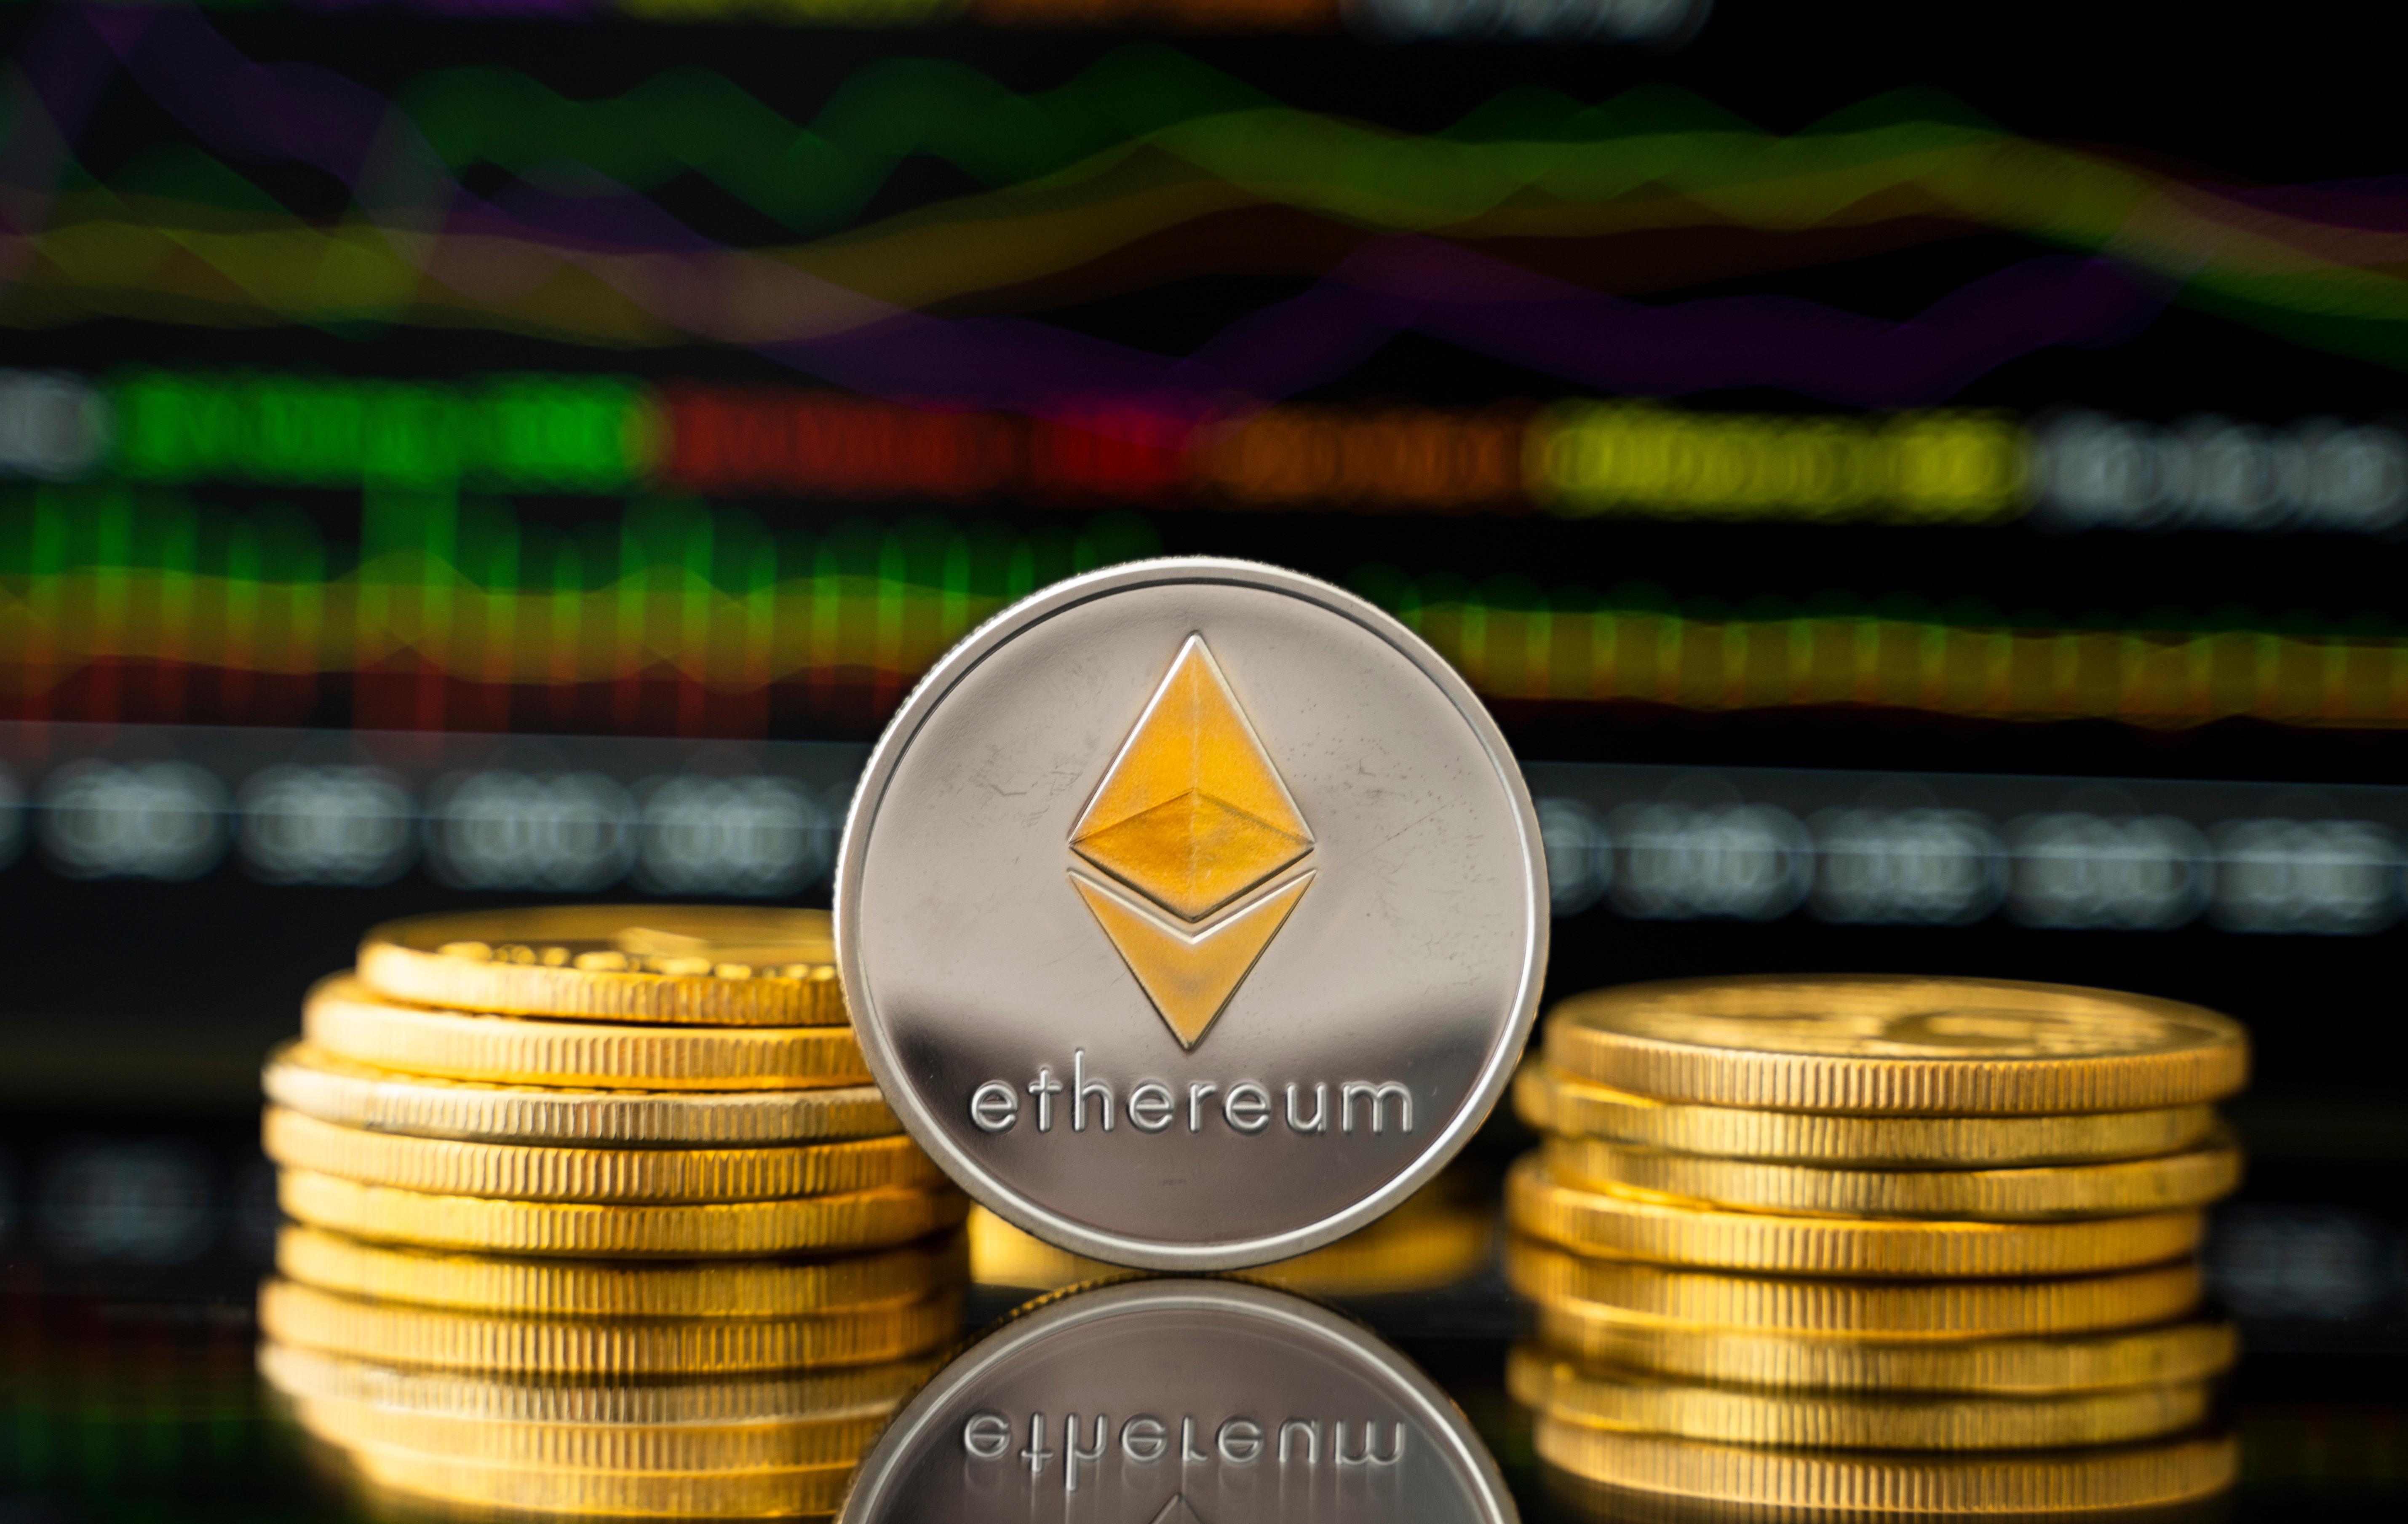 Ethereum price: Fed-related jitters squash positive sentiment on crypto’s future